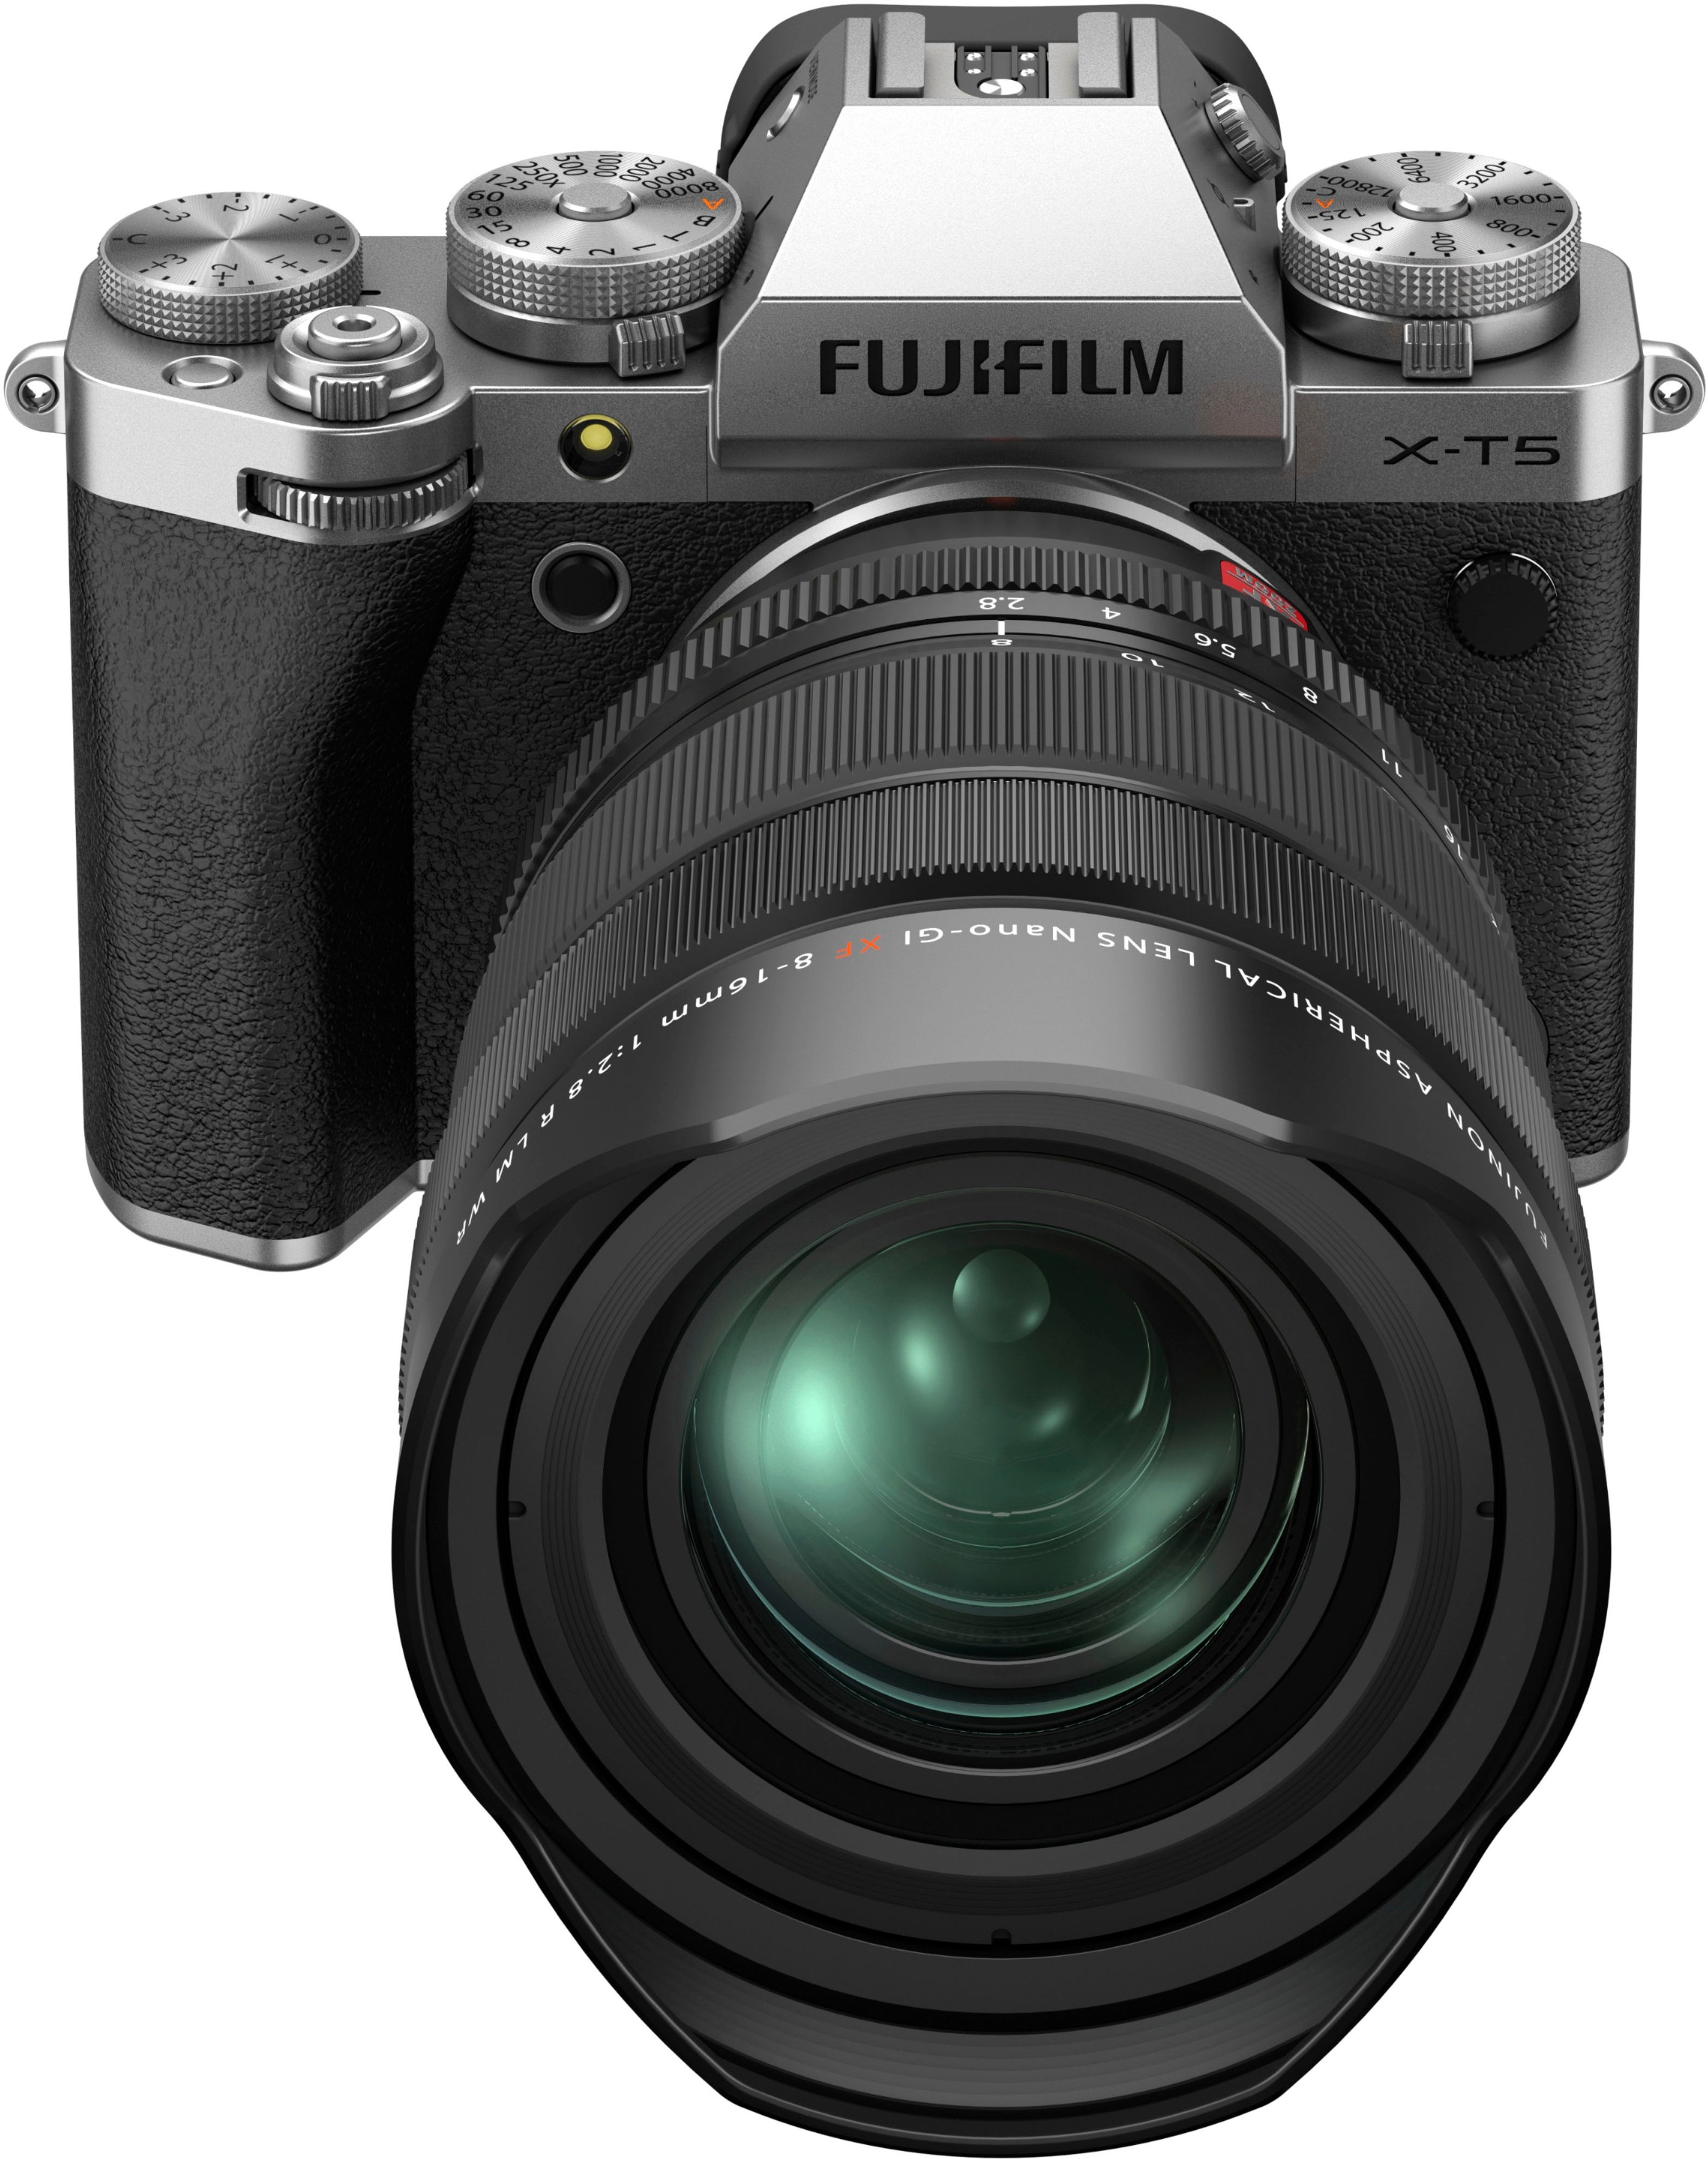 Fujifilm X-T5 Mirrorless Camera (Silver) Bundle with Extra Battery &  Charger Kit, Tripod, Backpack, Camera Case & More, USA Authorised with  Fujifilm Warranty